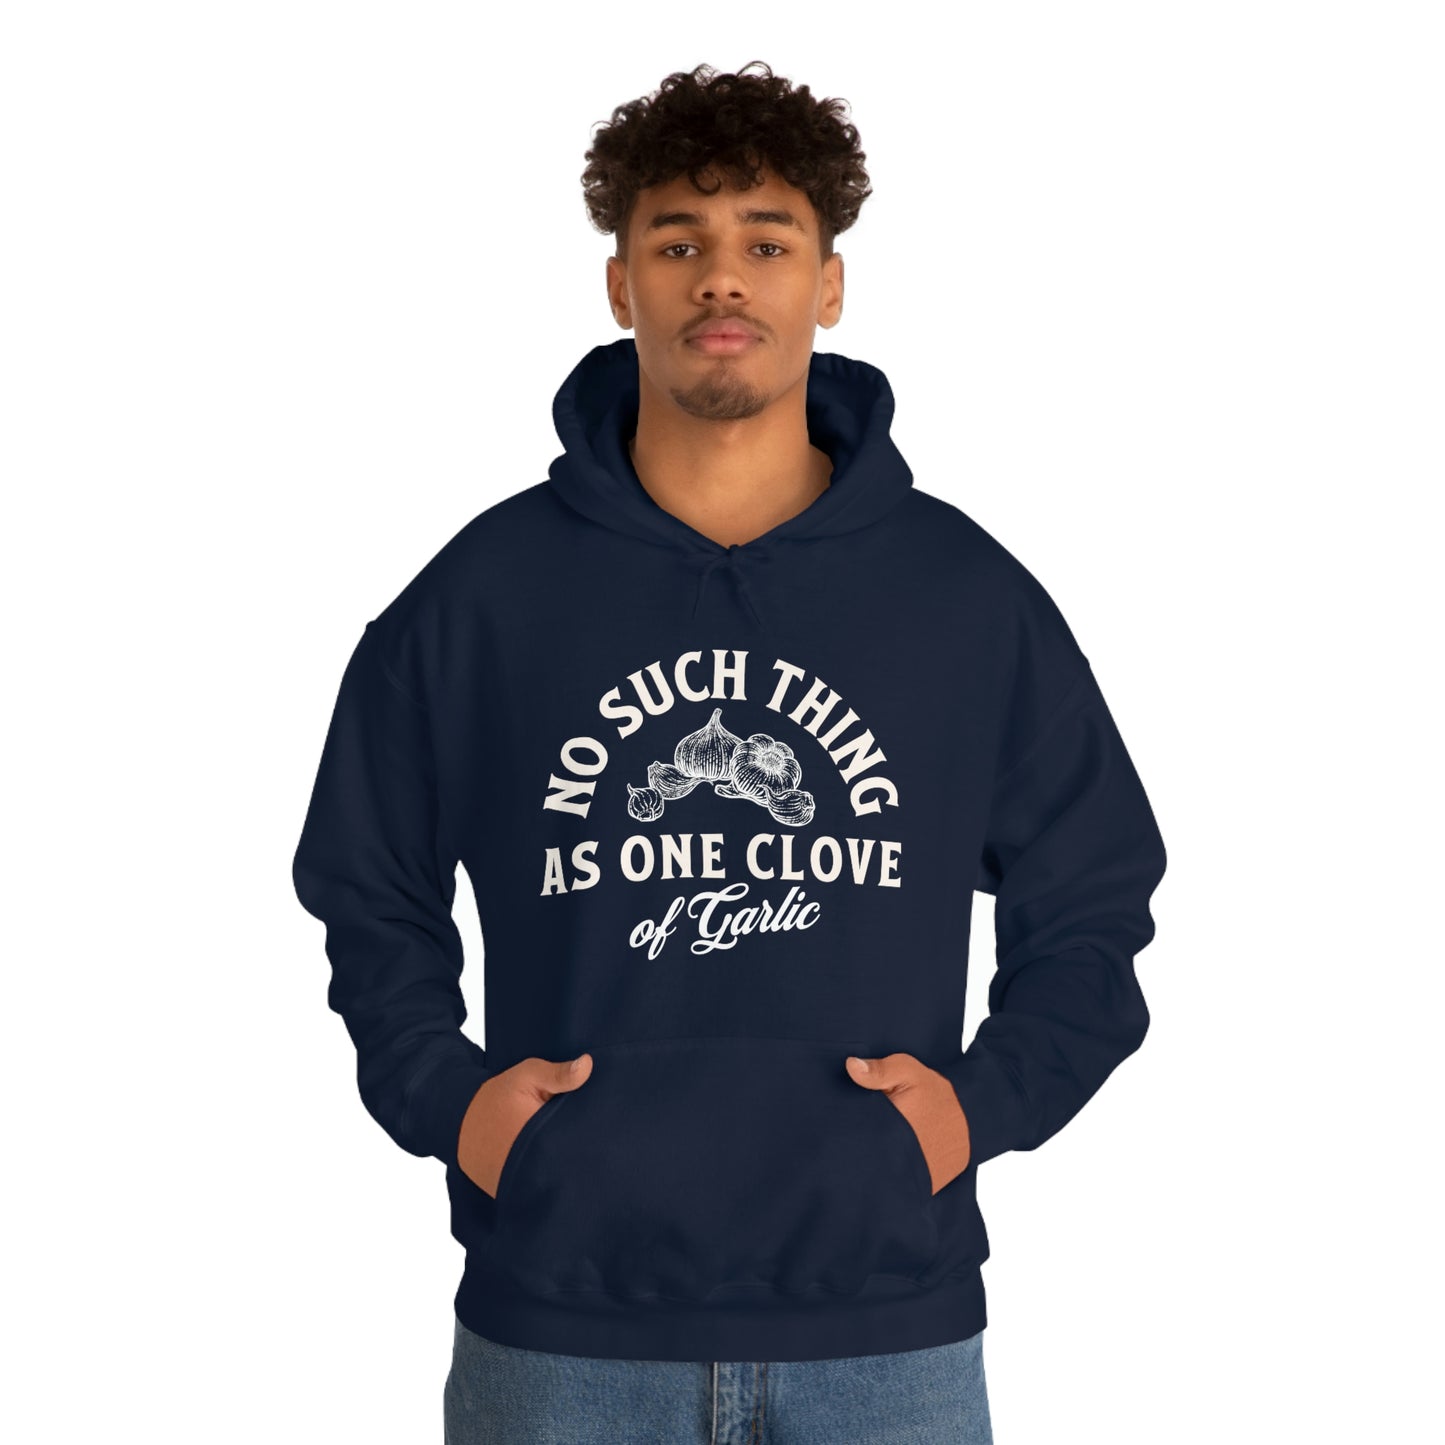 "No such thing as one clove of garlic" Unisex Heavy Blend™ Hooded Sweatshirt